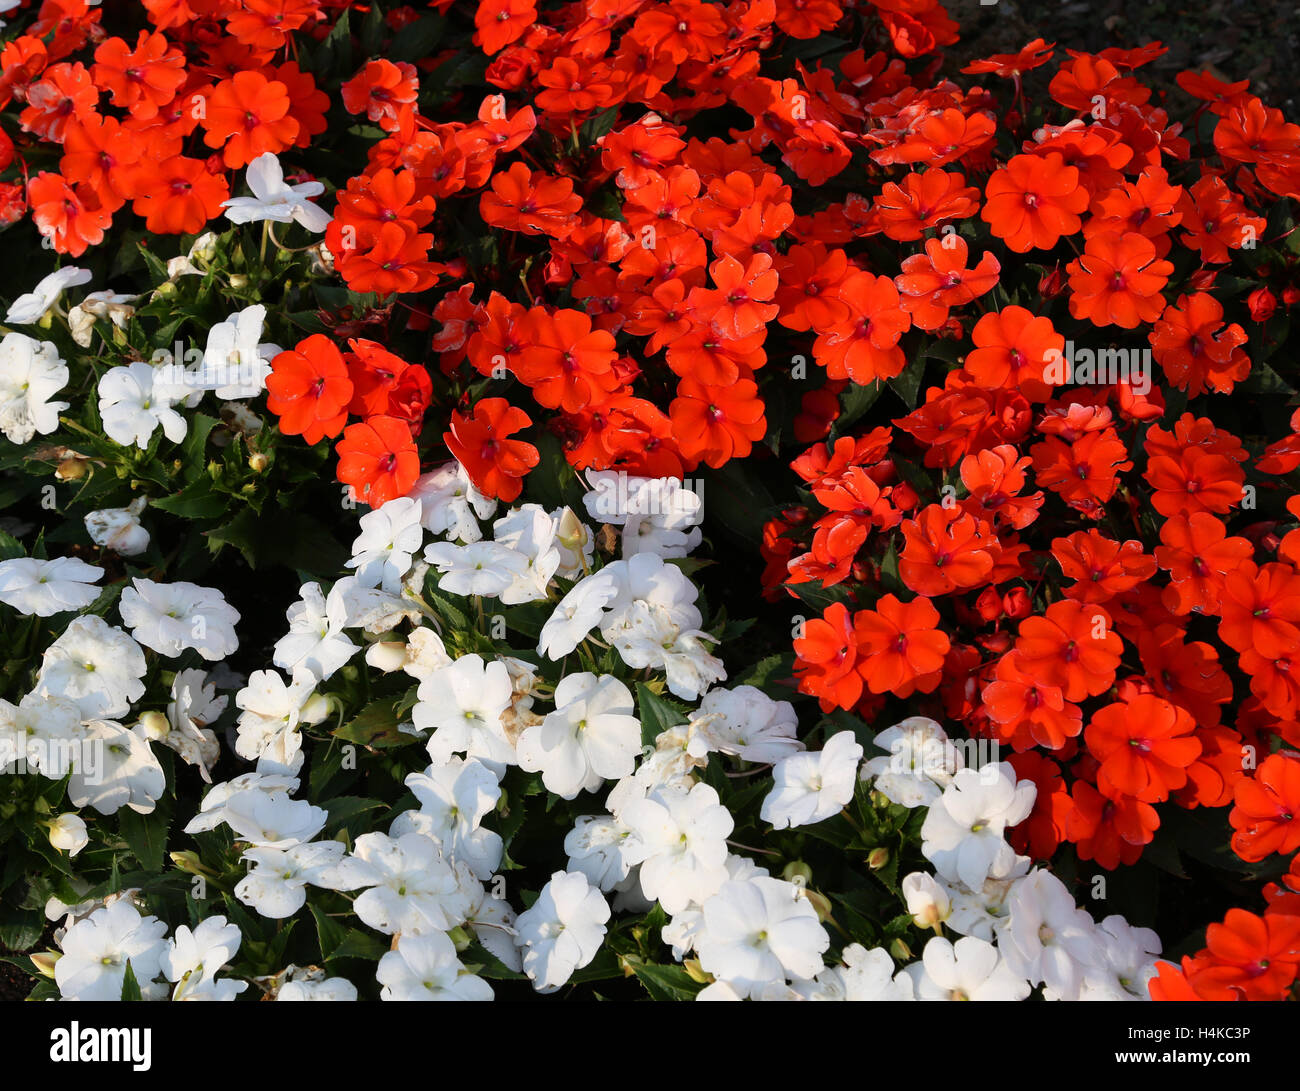 background of red and white impatiens flowers in the flowerbed Stock Photo